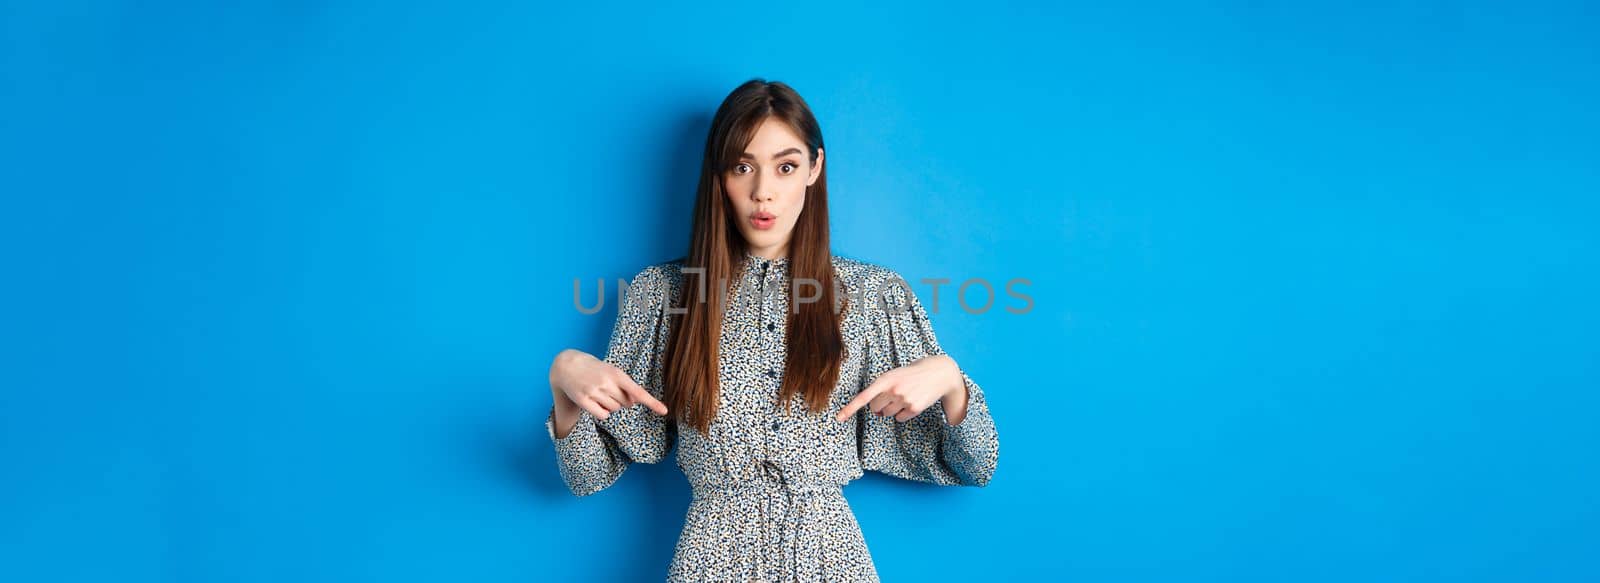 Excited beautiful woman in dress say wow, pointing fingers down and look amused, checking out promotion, standing on blue background.